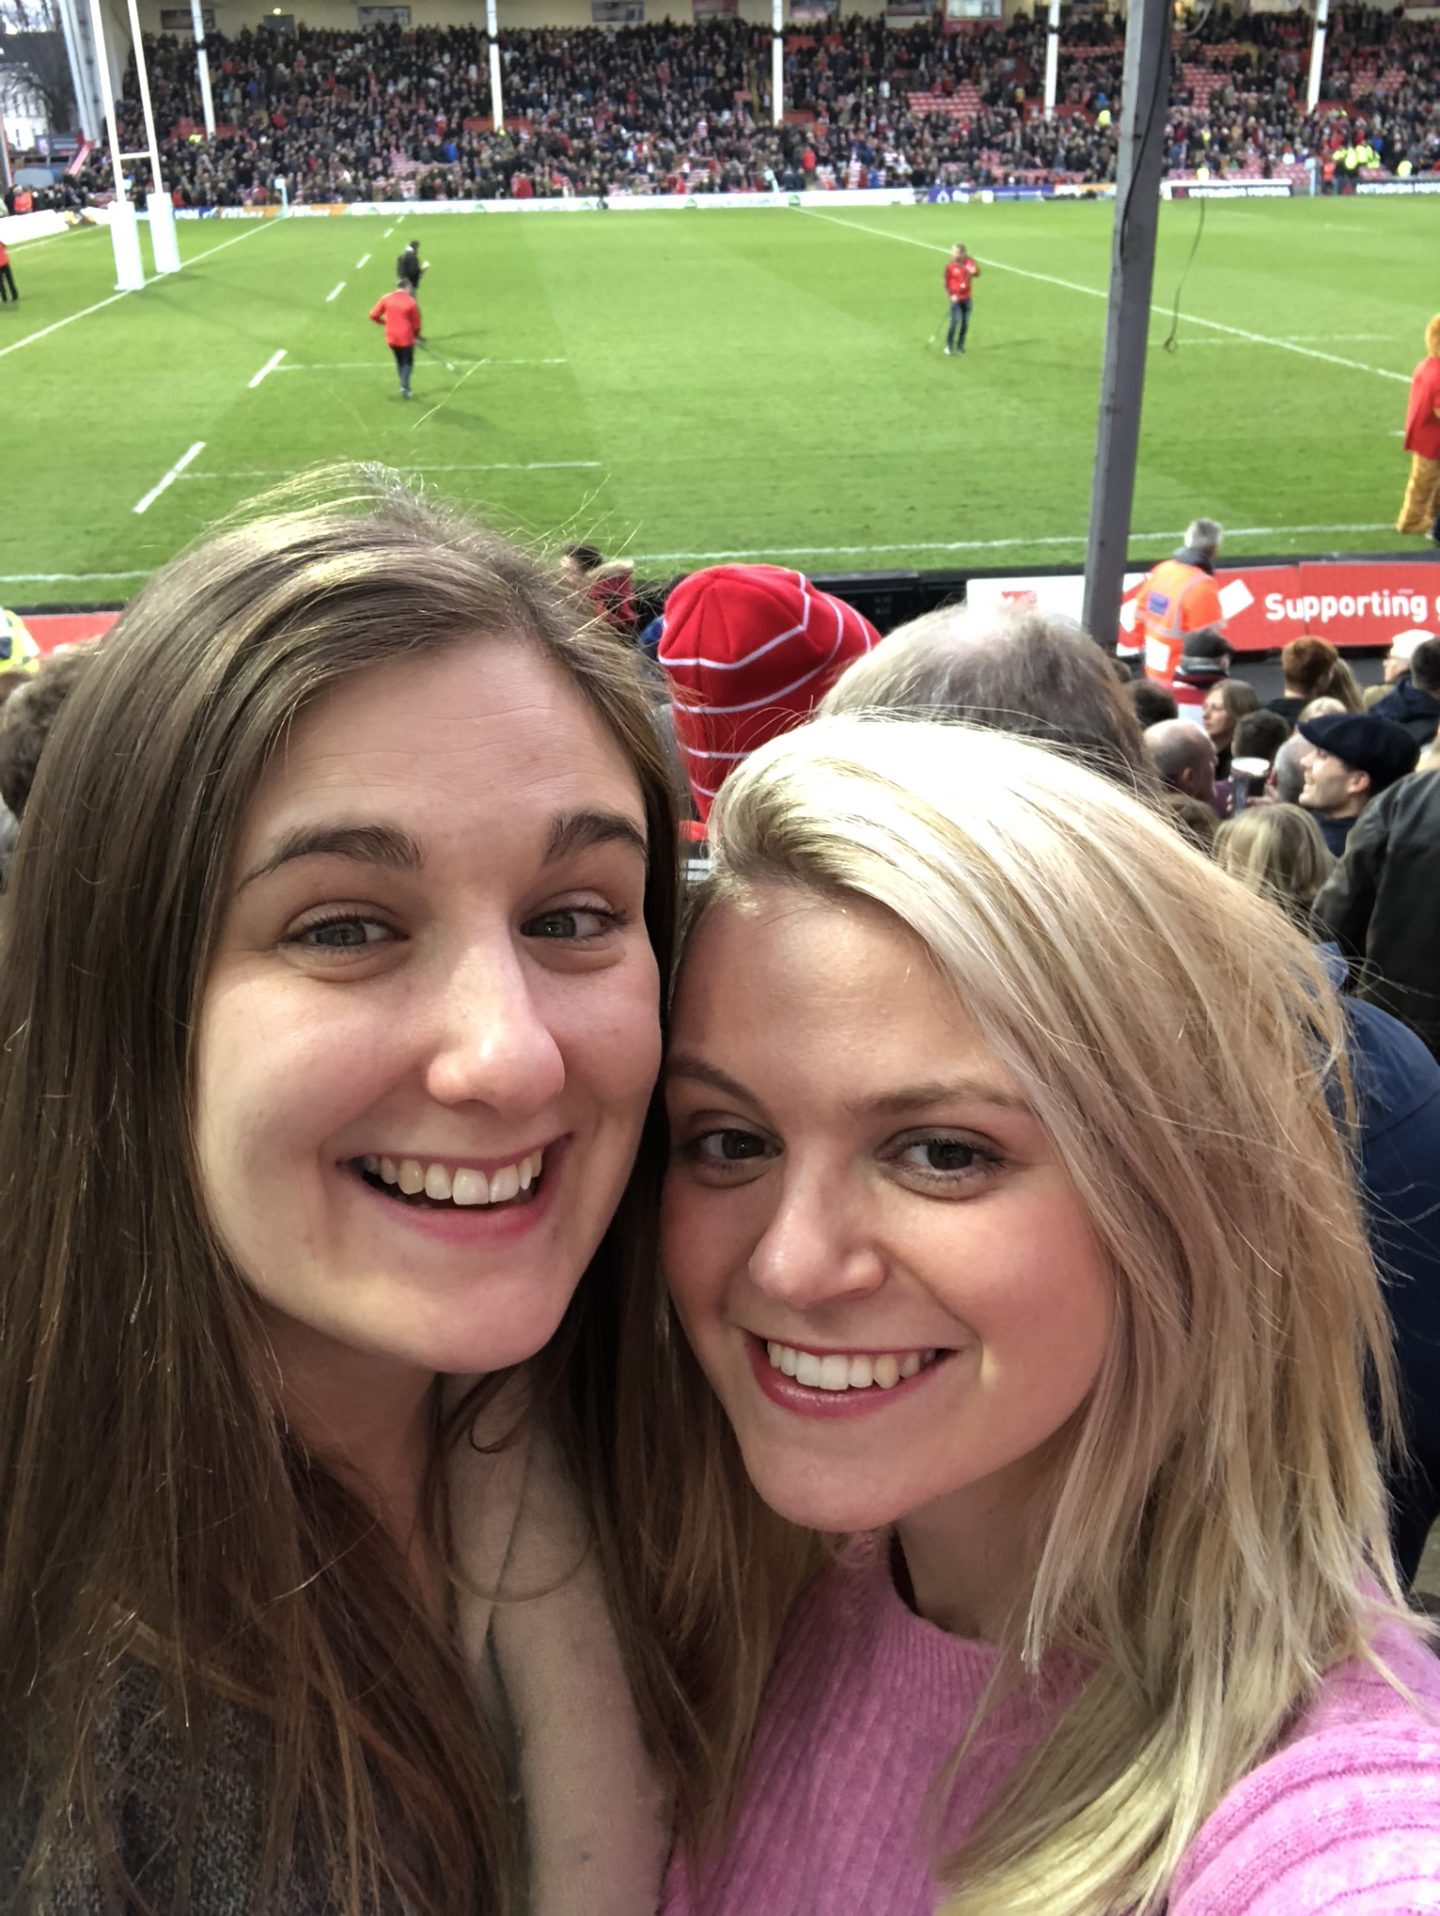 Cheering on Gloucester Rugby